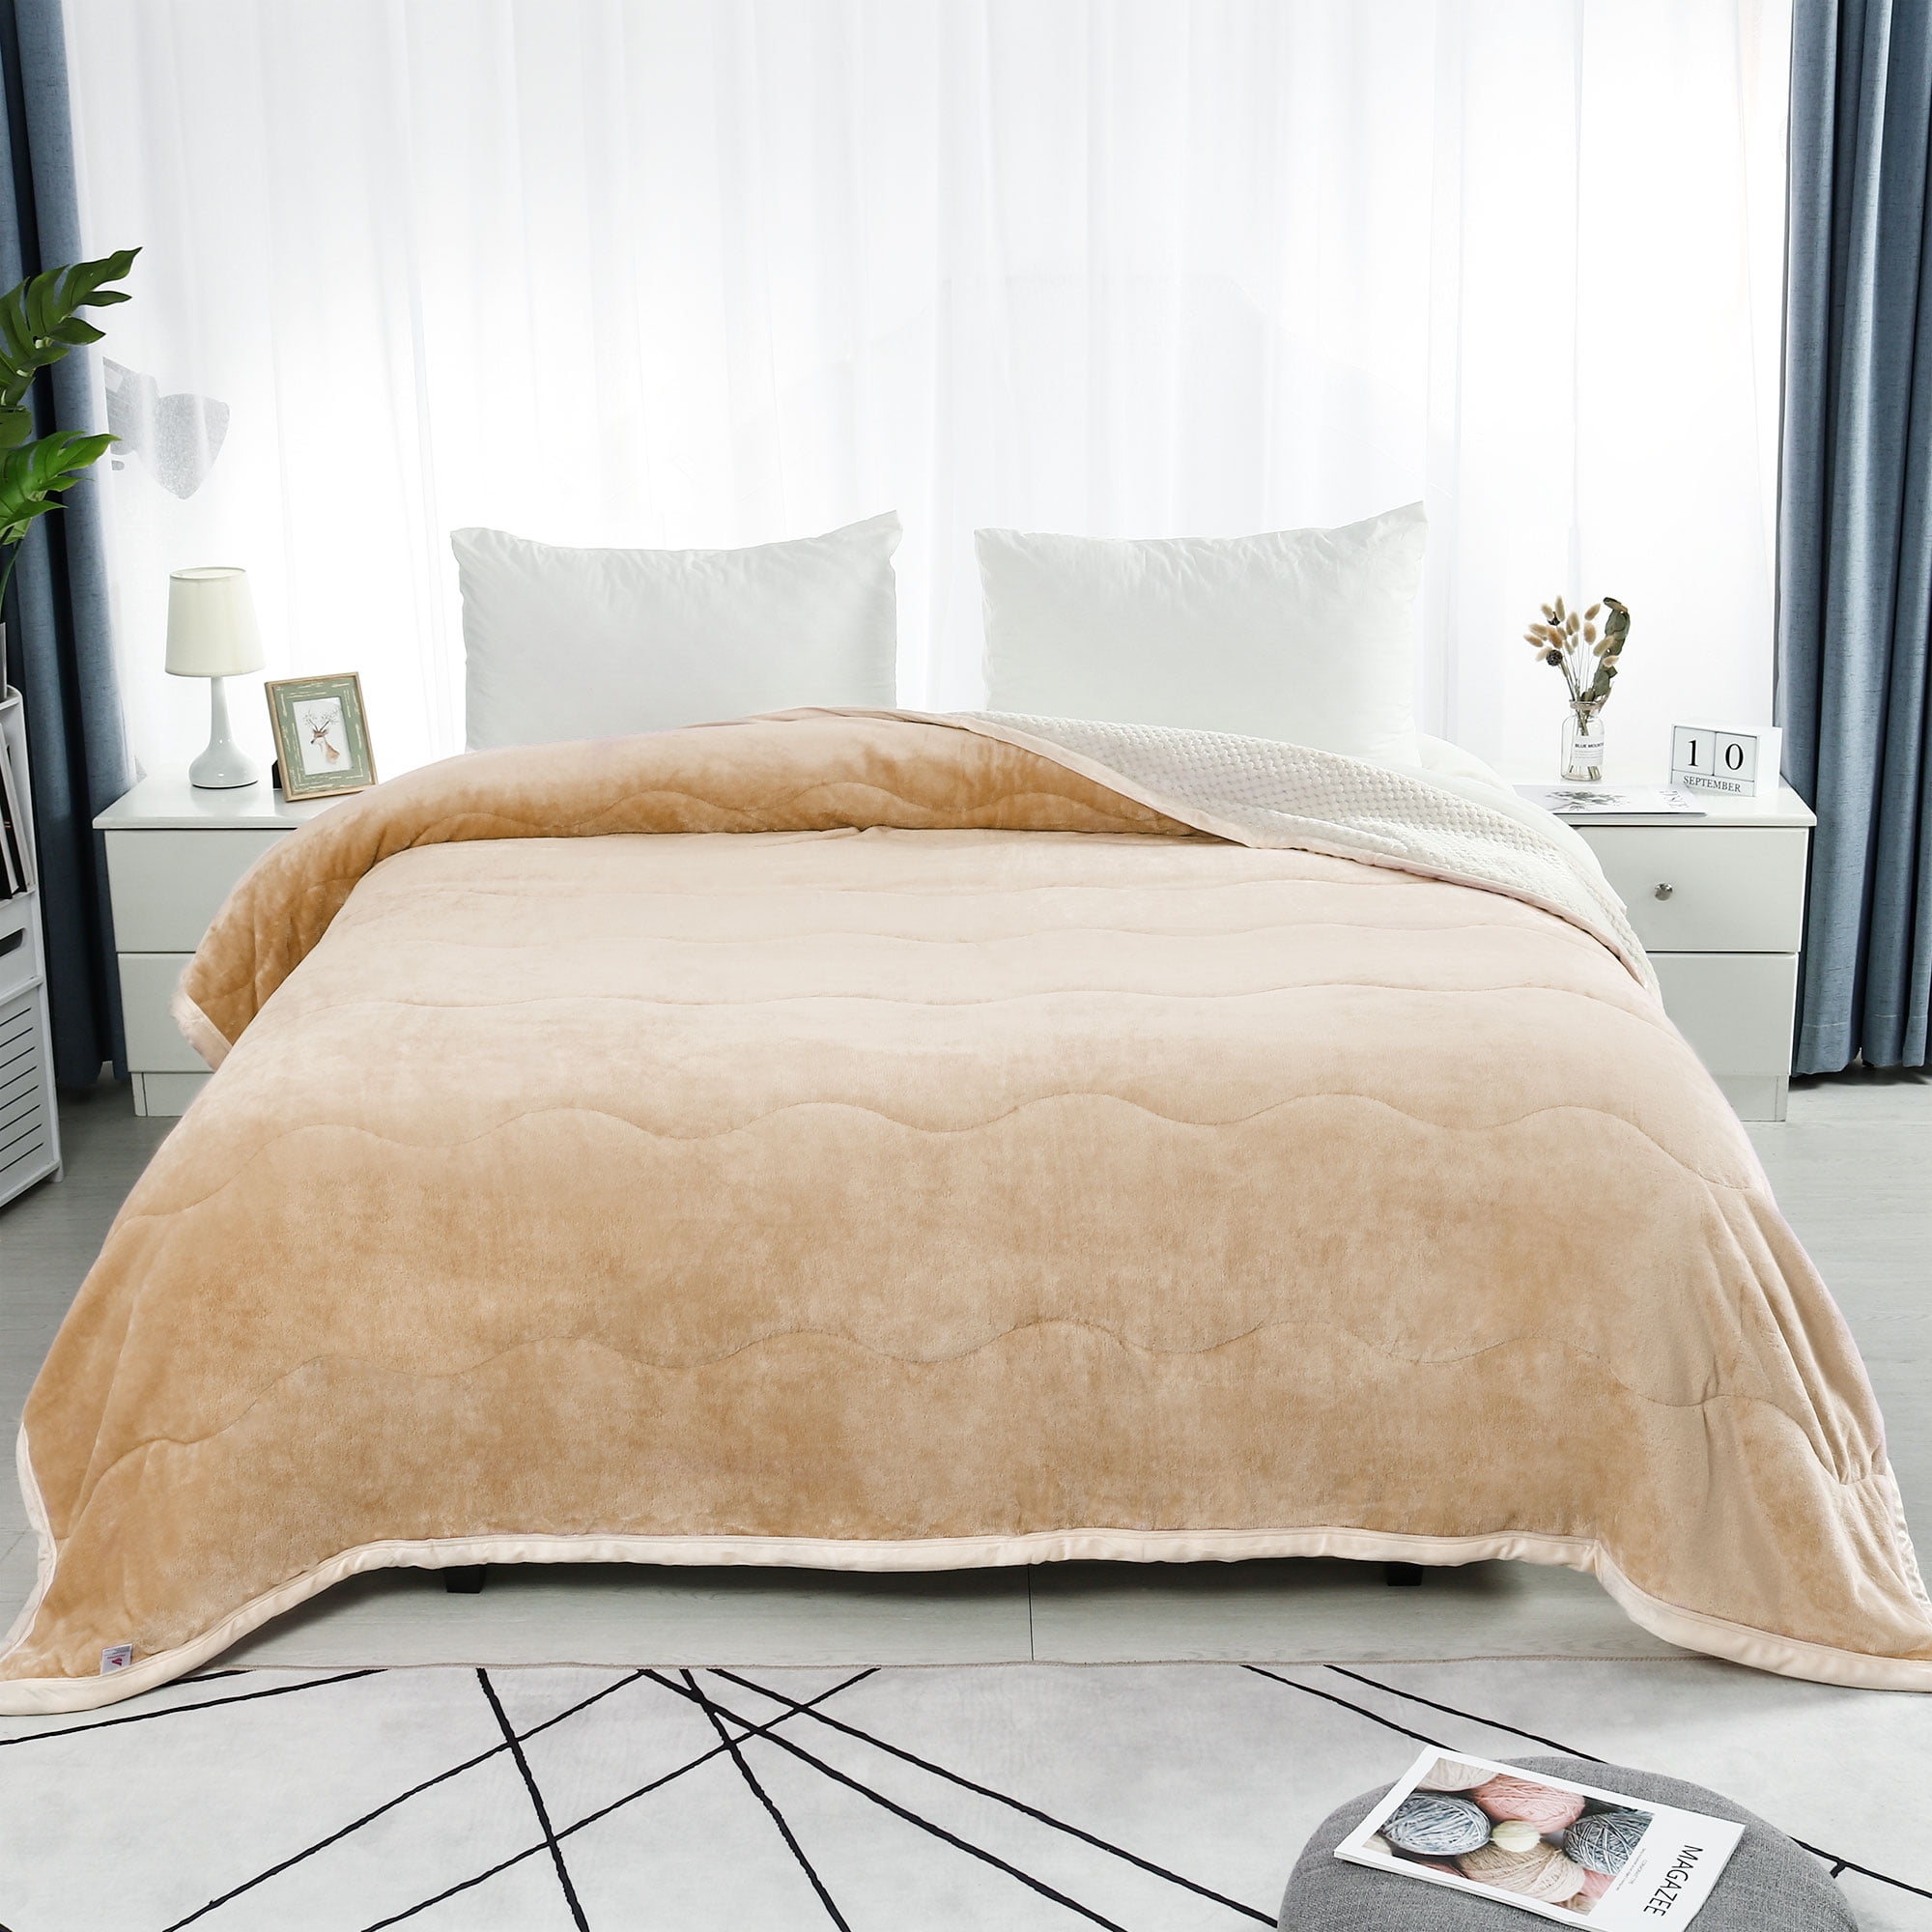 Details about   Duvet Comforter Blankets Bedding Sheet Thick Warm Blanket Winter Bed Soft Covers 